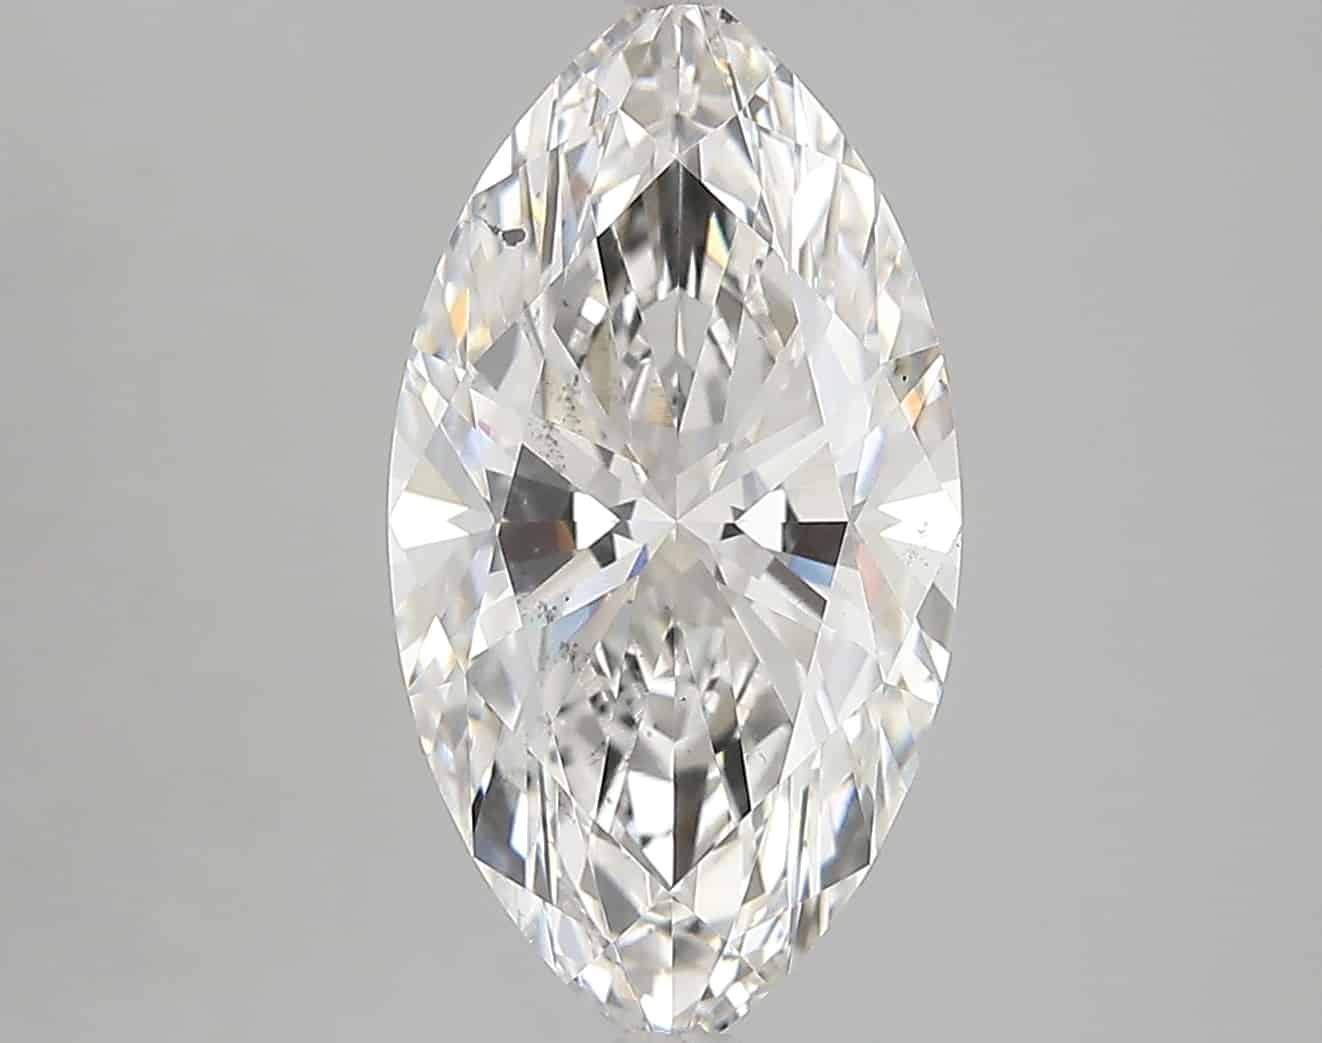 Lab Grown 3.68 Carat Diamond IGI Certified si1 clarity and H color